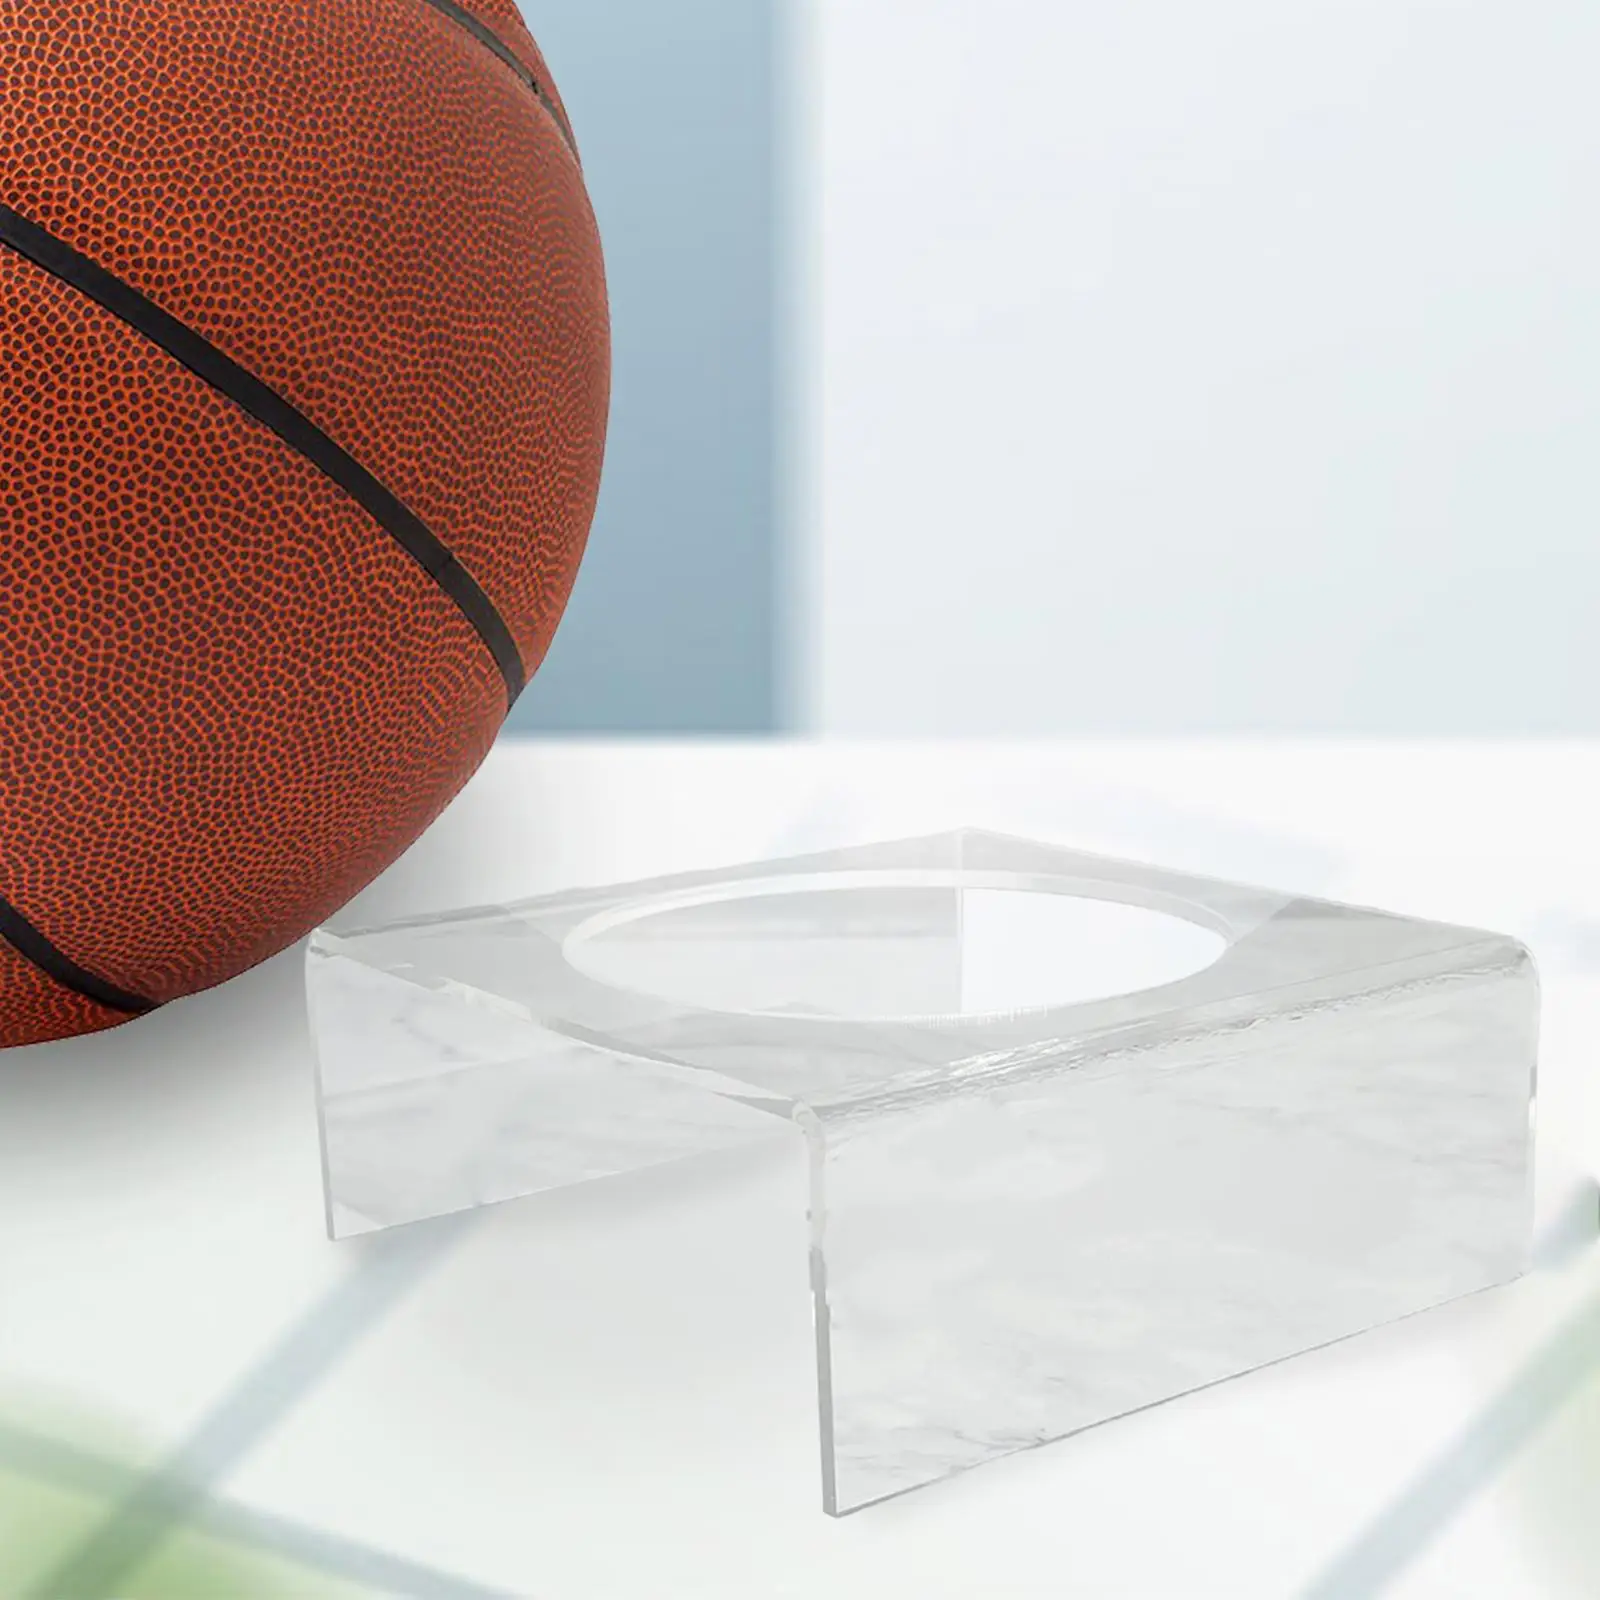 Heavy Duty Acrylic Ball Stand Porable Display Accessories for Basketball Football Soccer Rugby Bowling Display Holder